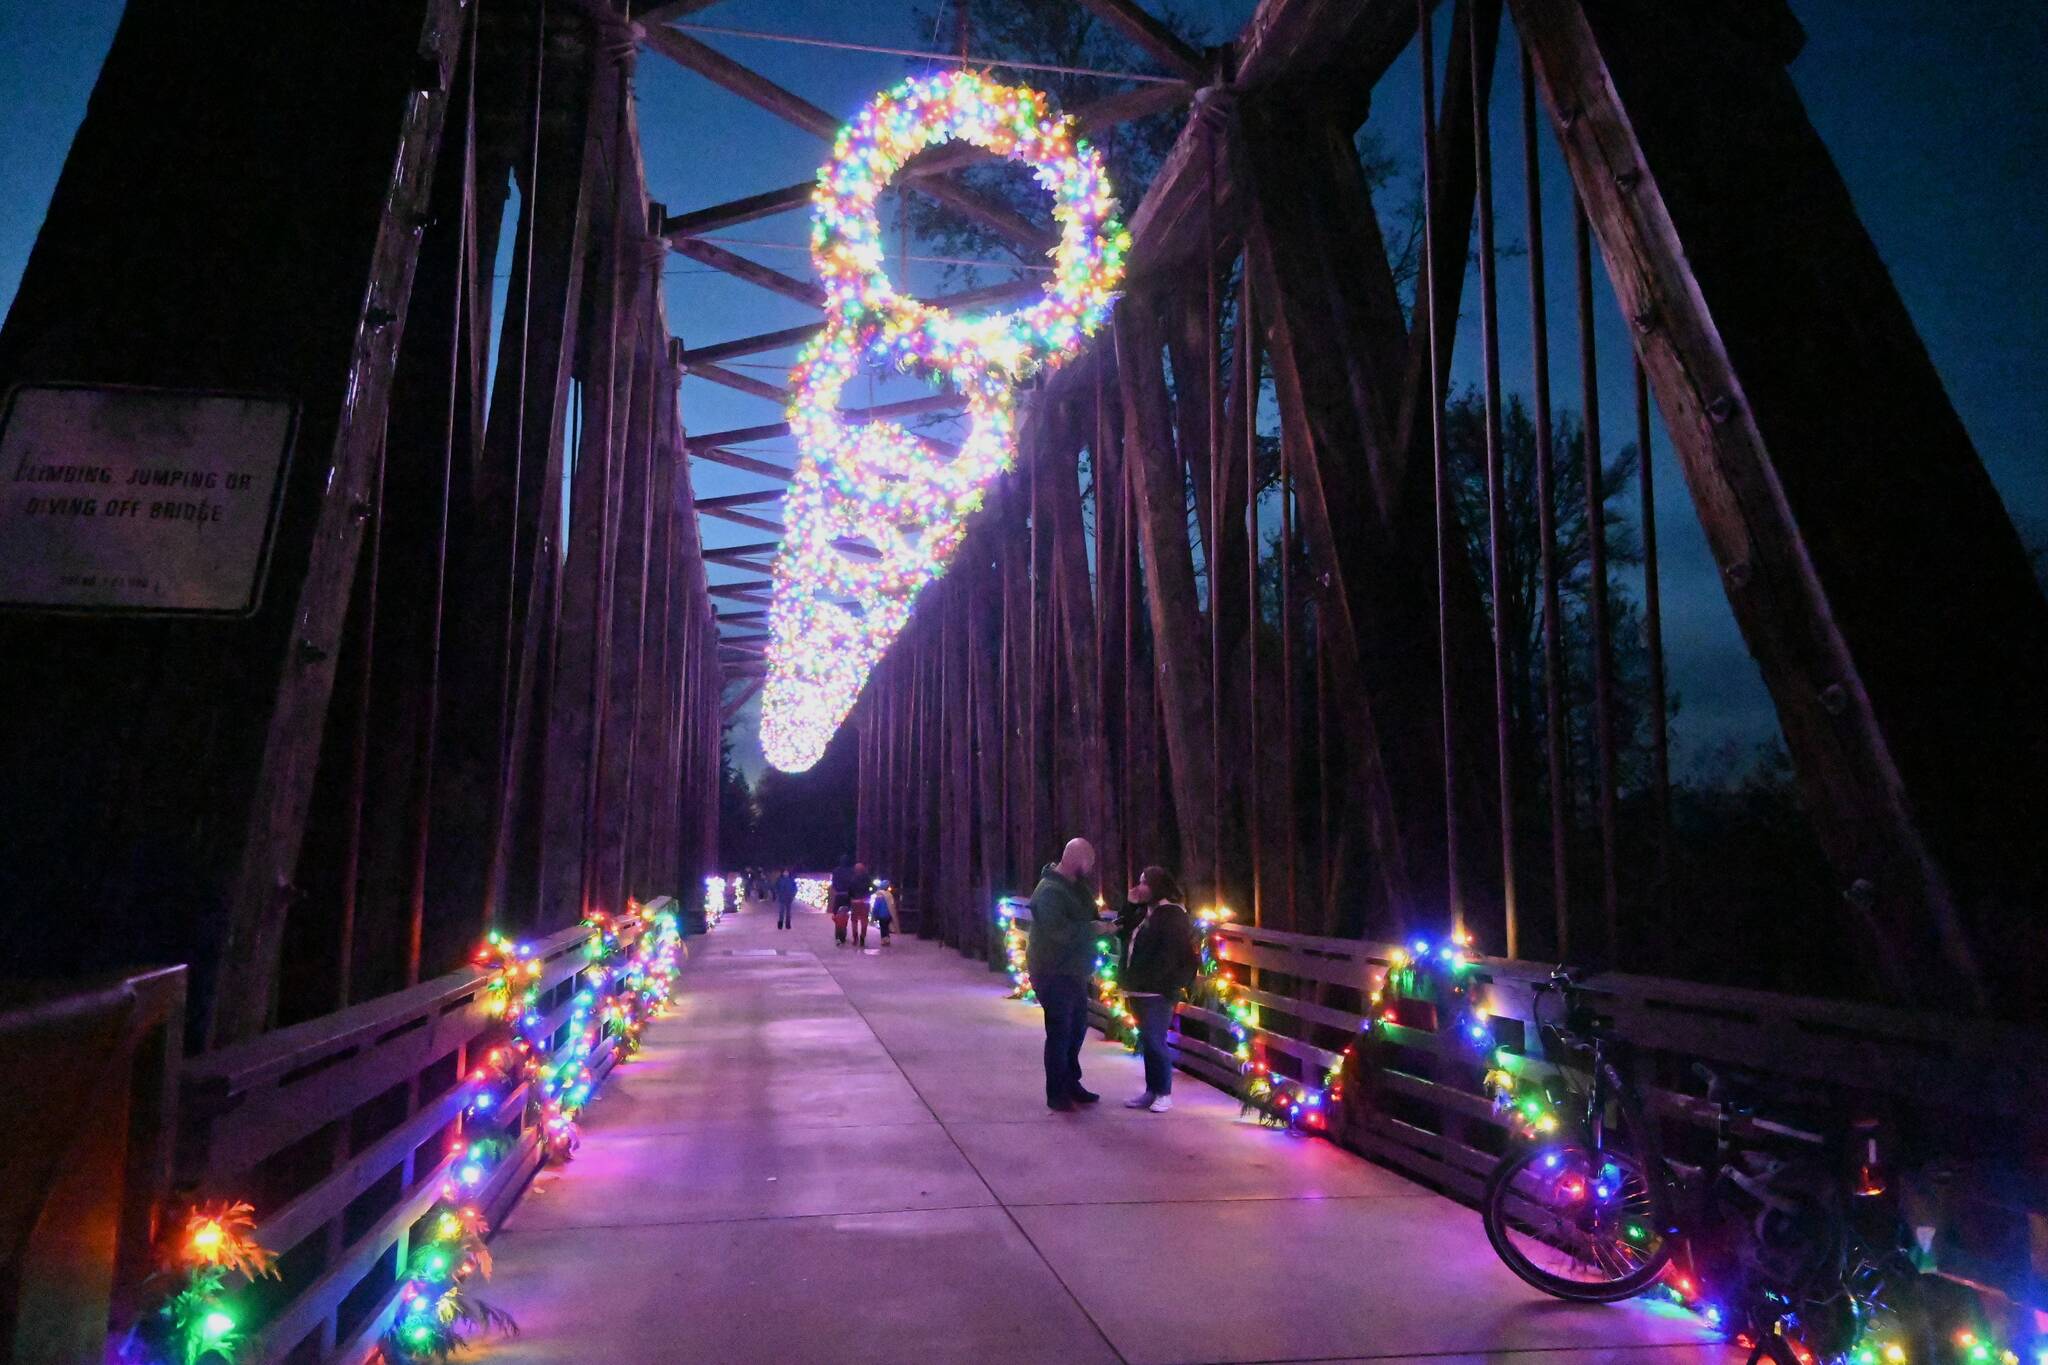 Sequim Gazette photo by Michael Dashiell / Visitors enjoy holiday-themed lighting the historic Railroad Bridge at Railroad Bridge Park on Saturday, Nov. 19. The annual River Center Holiday Nature Mart at the park’s Dungeness River Nature Center, held Saturday and Sunday Nov. 19-20, coincided with Saturday’s bridge lighting. The bridge’s lights will be on display each day at 3 p.m. through December.